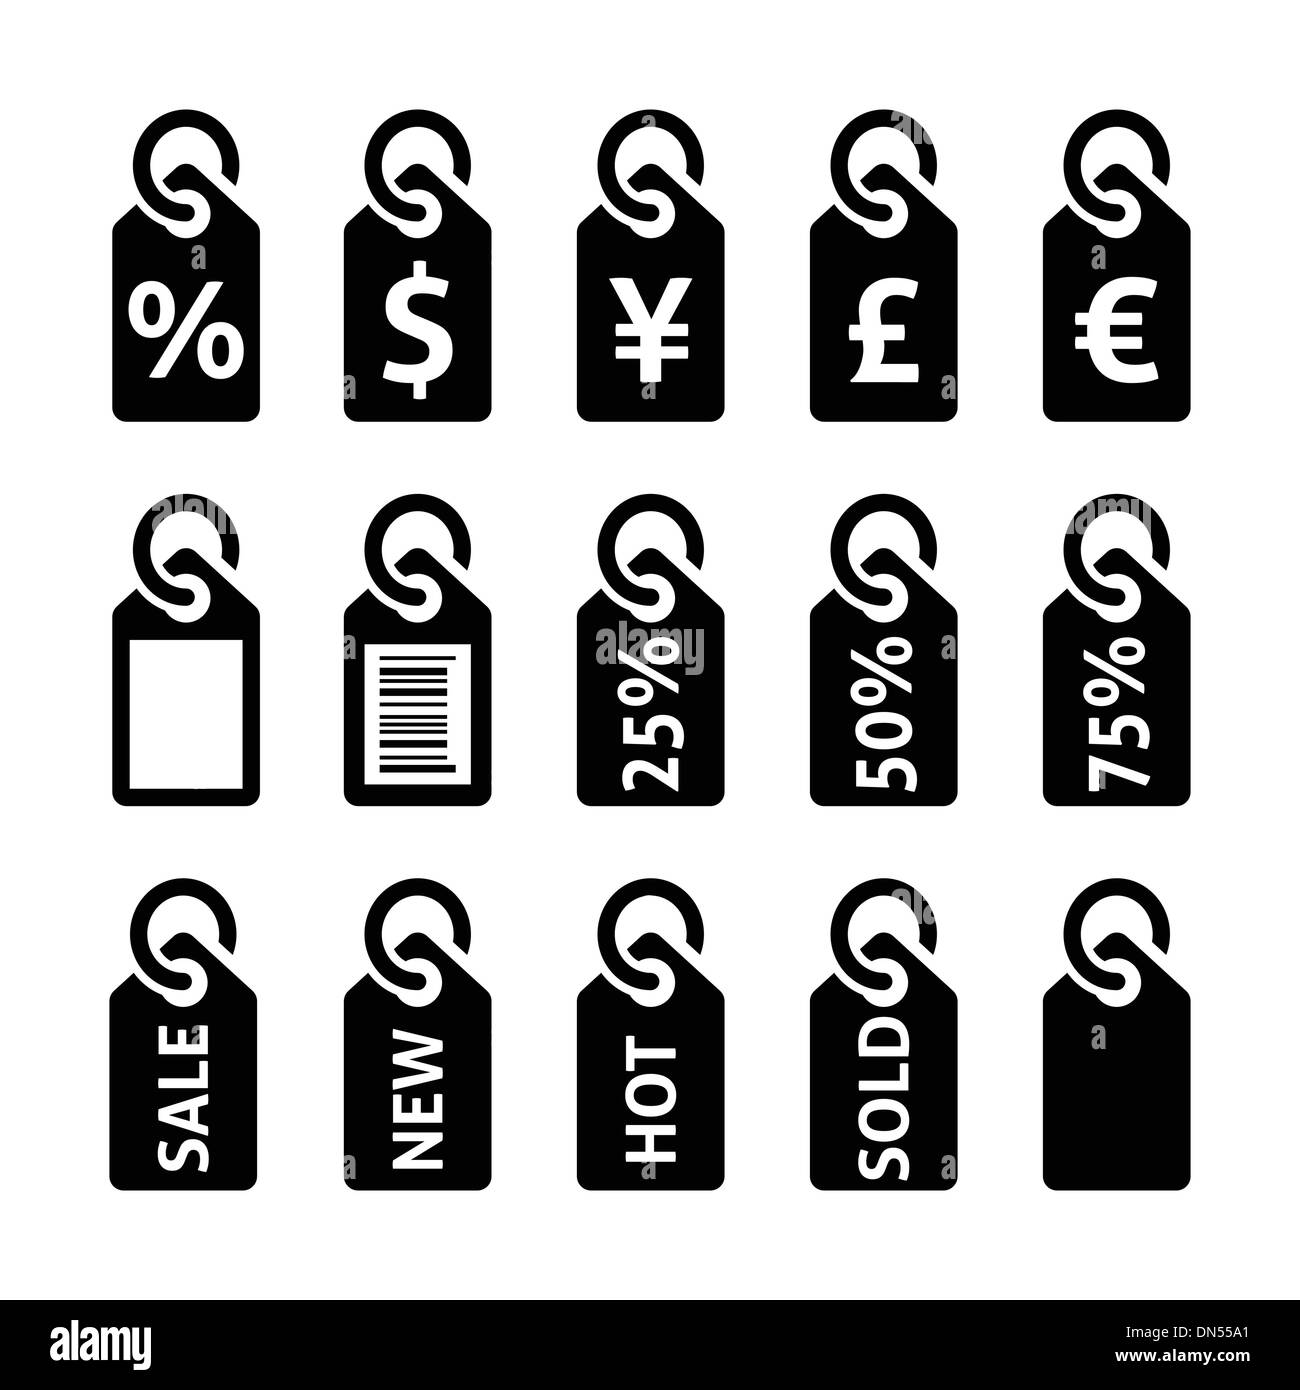 Shopping, price tag, sale vector icons set Stock Vector